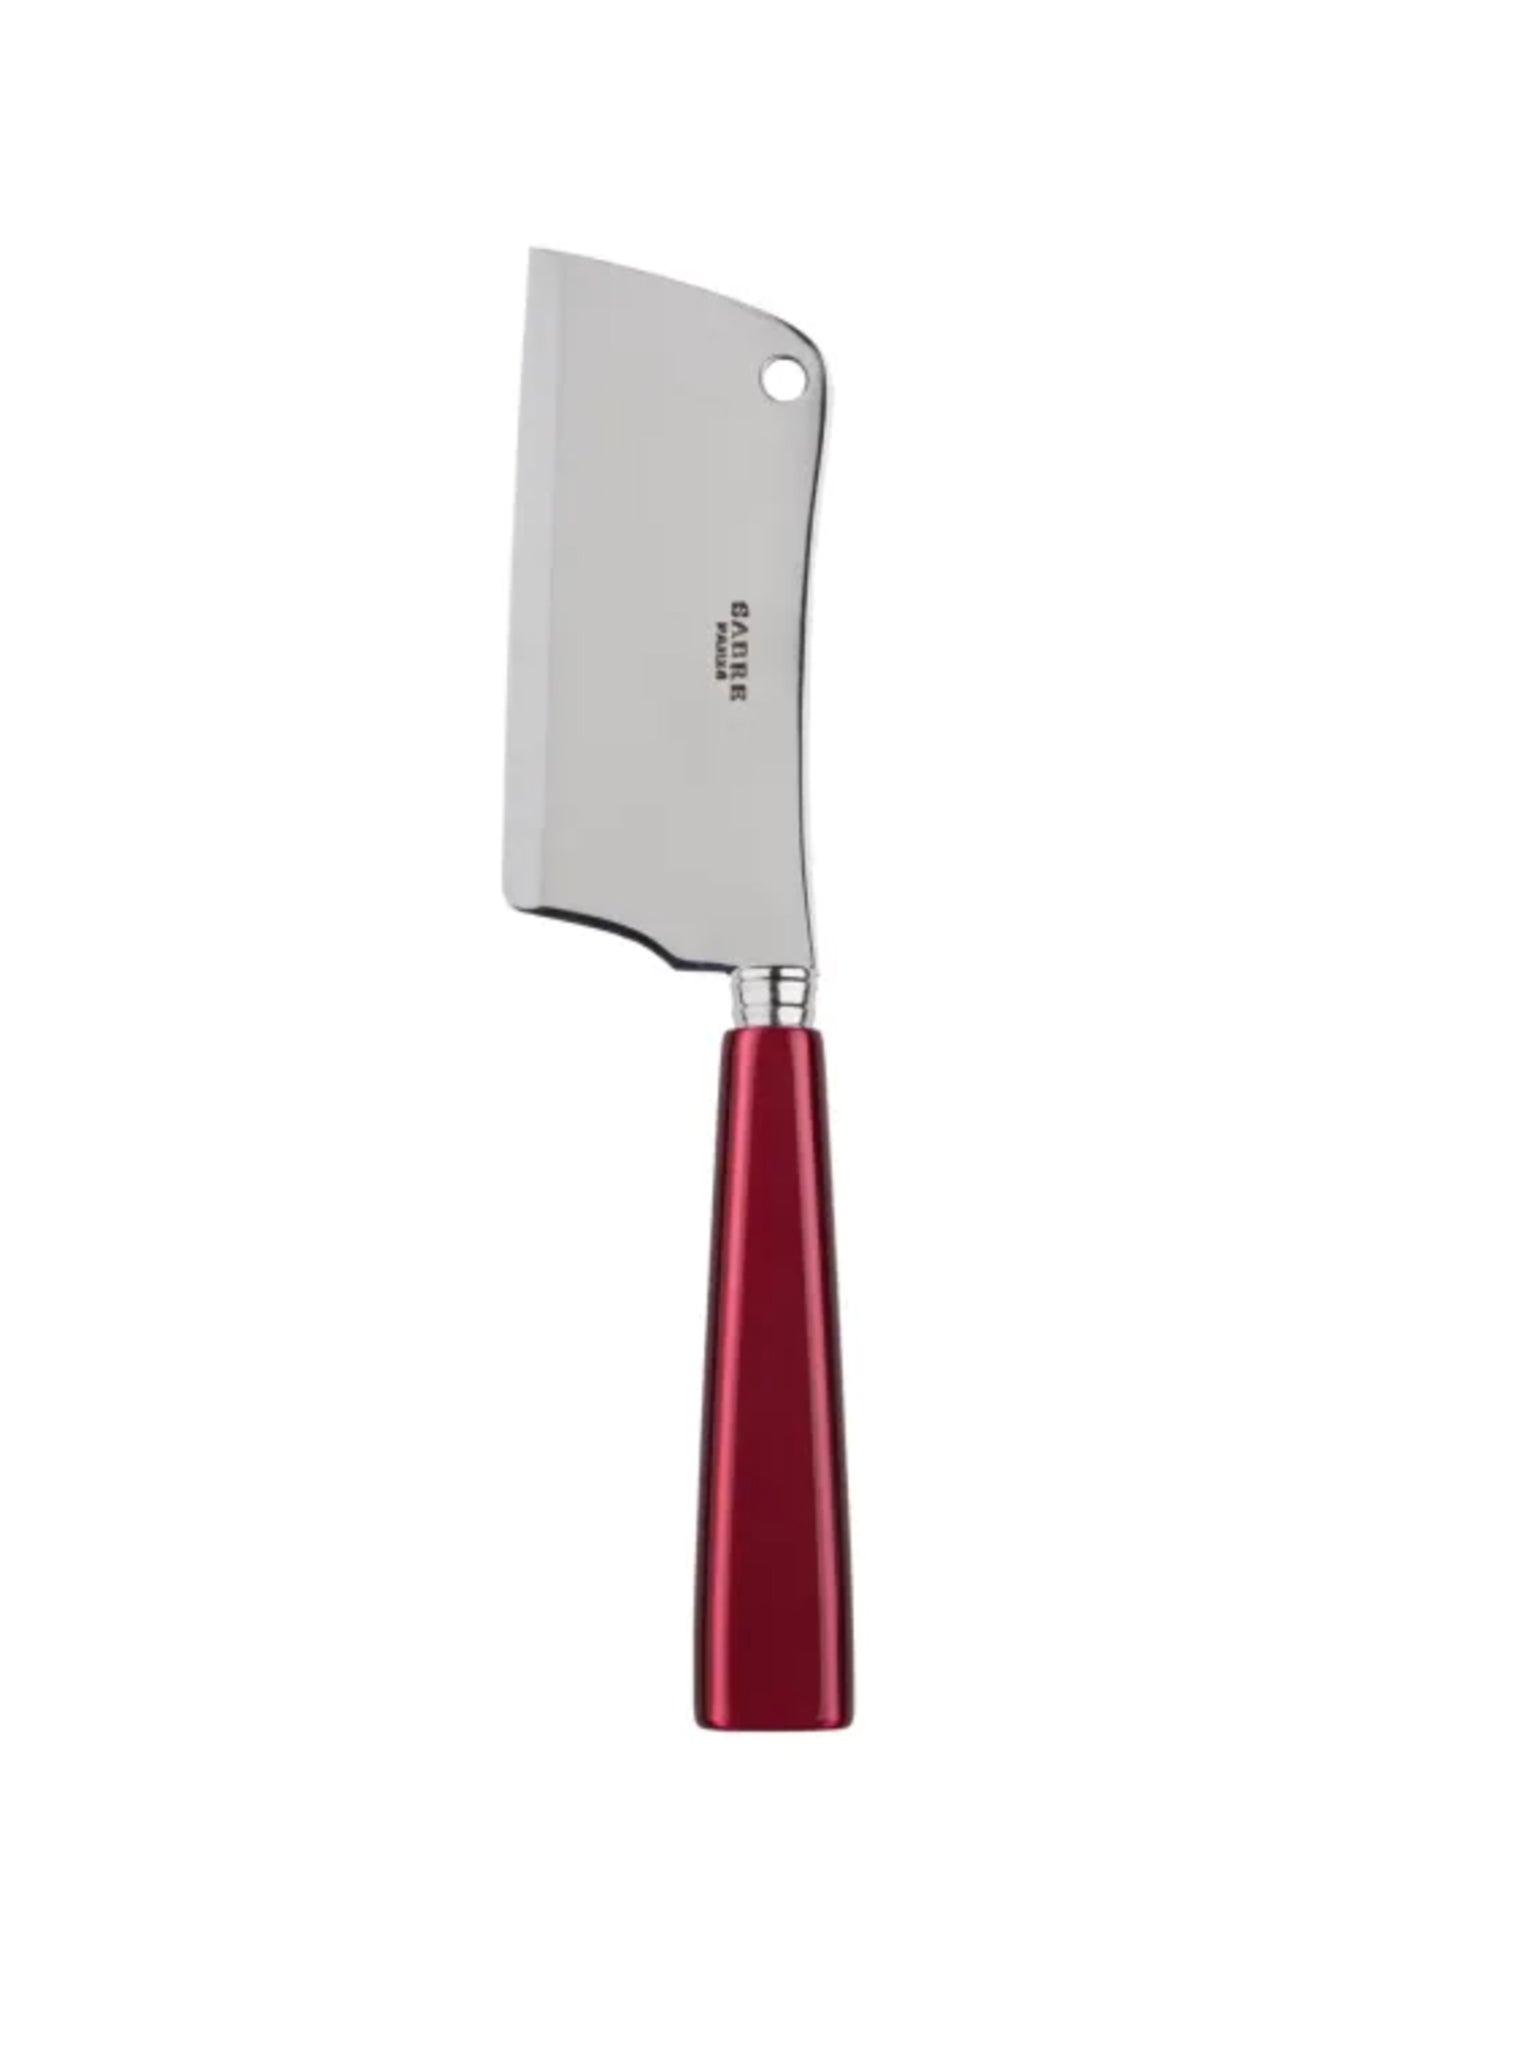 Sabre Paris Icone Red Cheese Cleaver